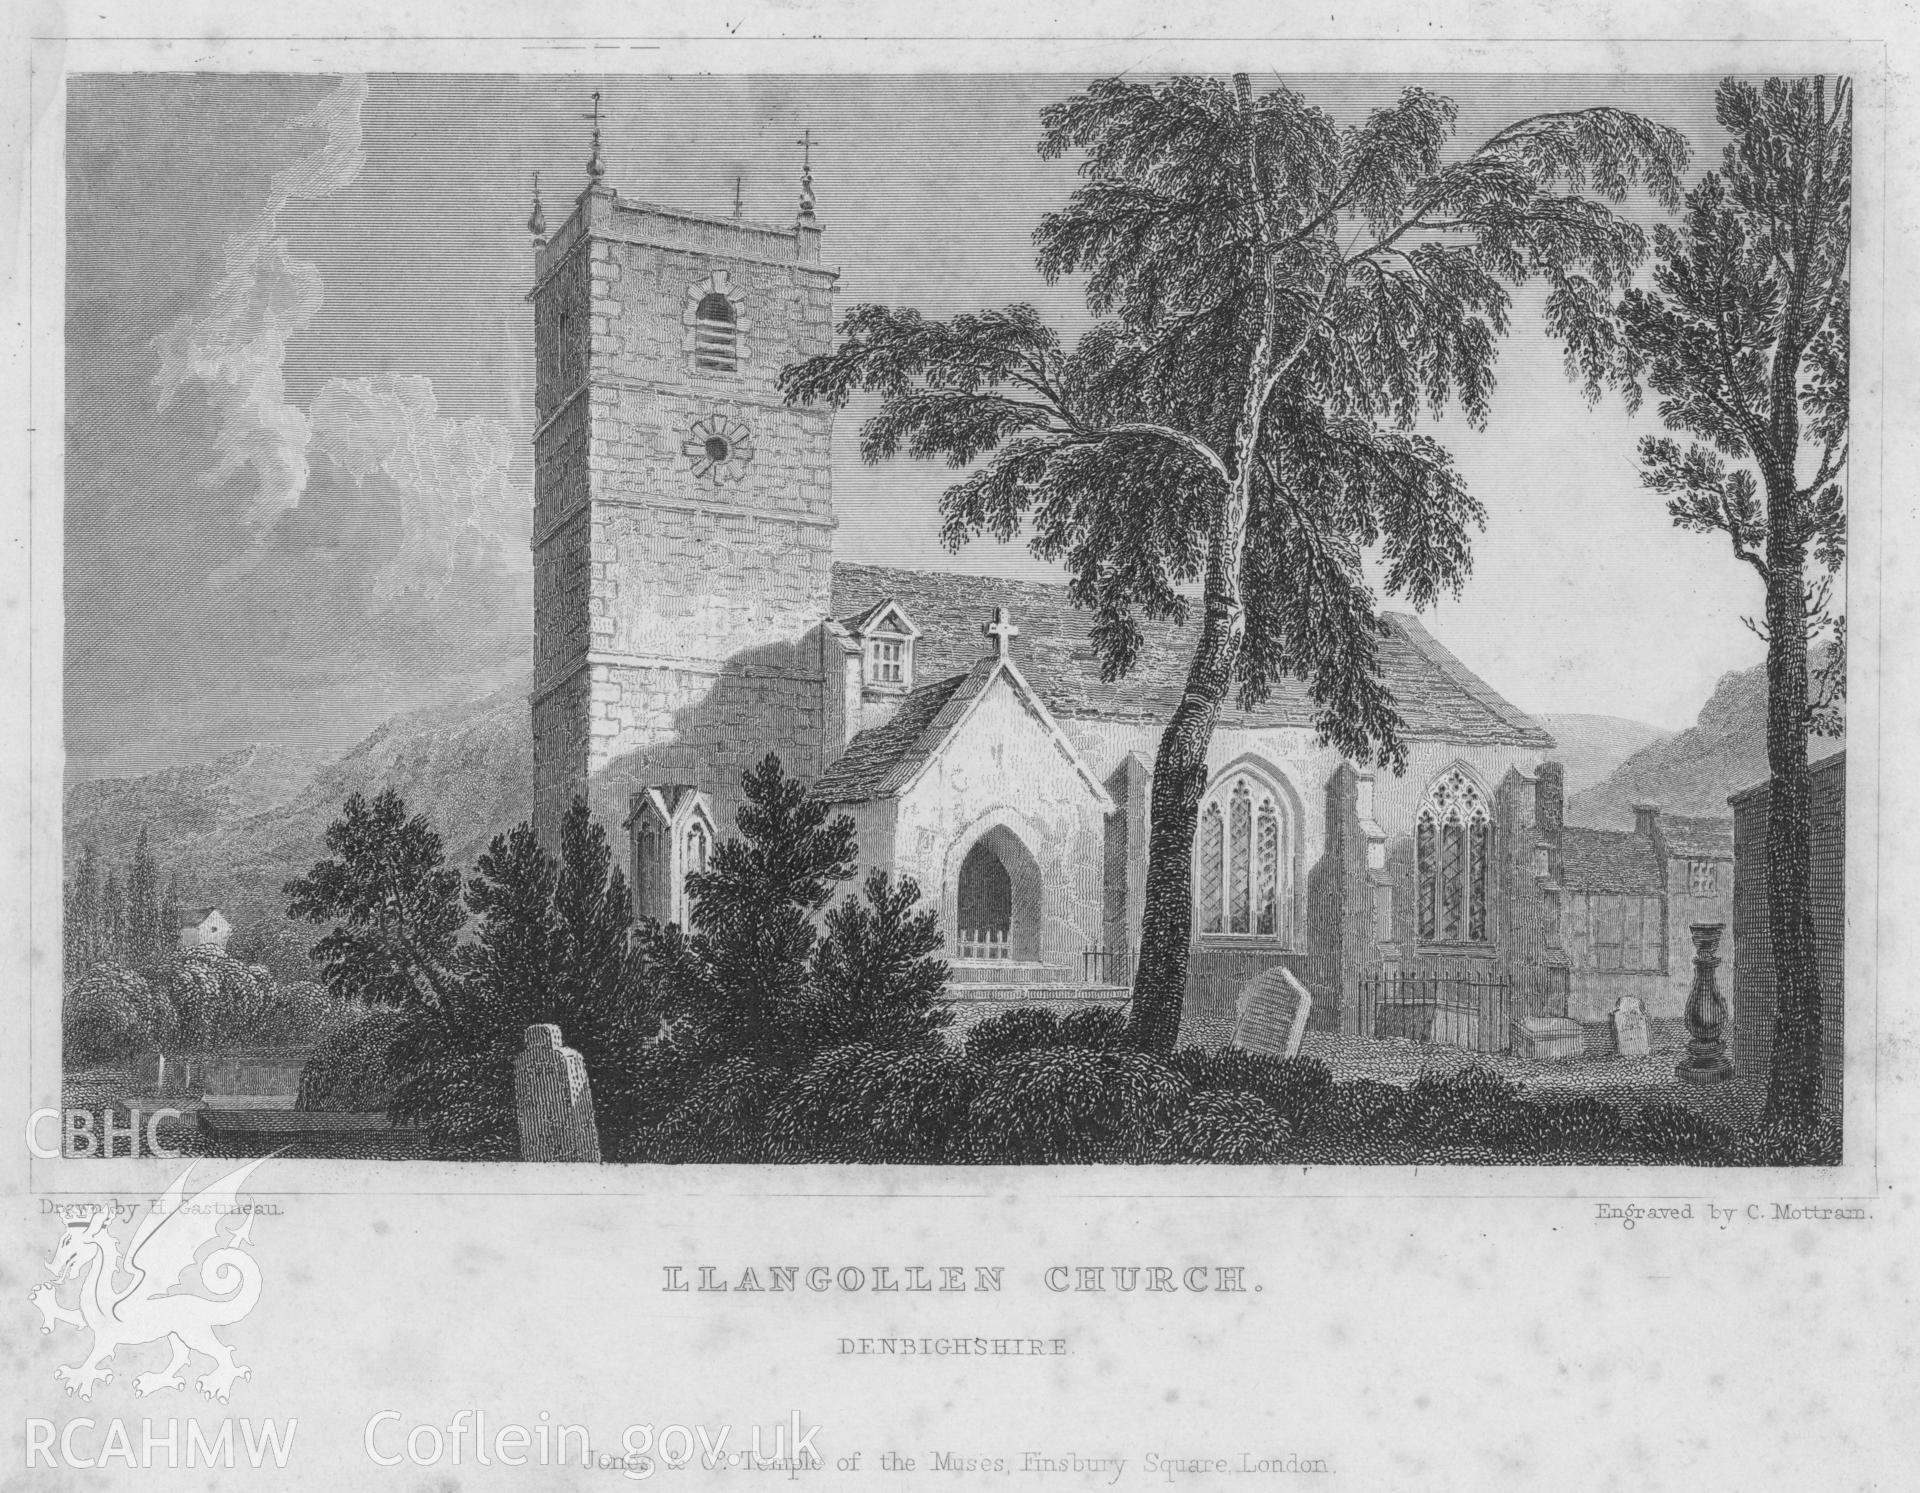 Digitised copy of an engraving of St Collen's Church, Llangollen.